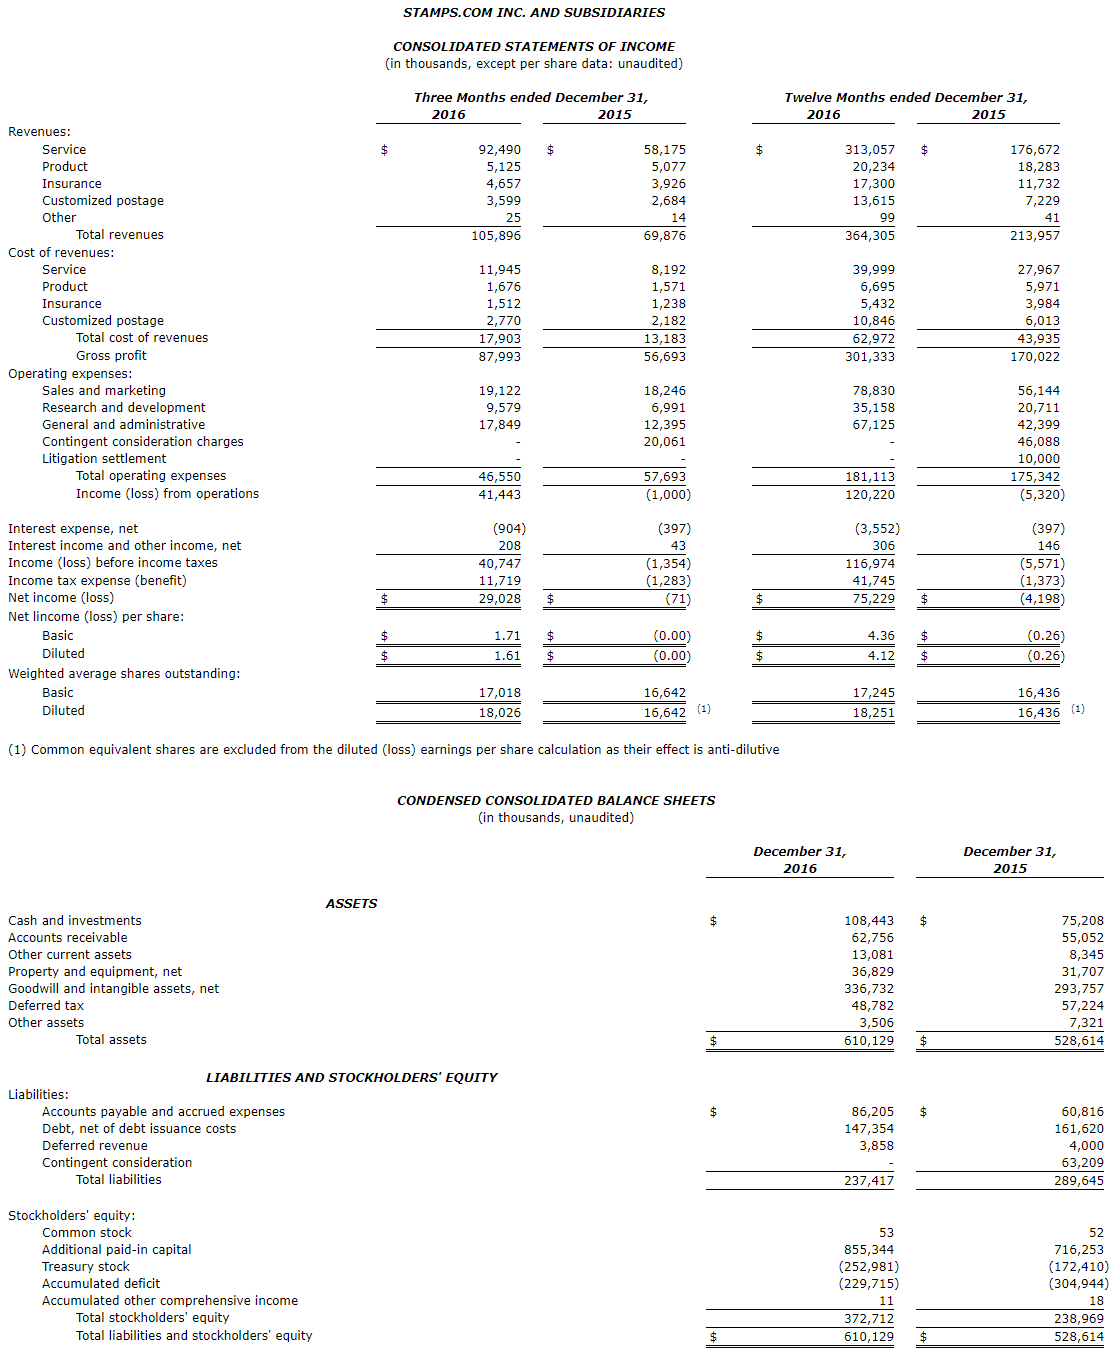 Table of Financial Data